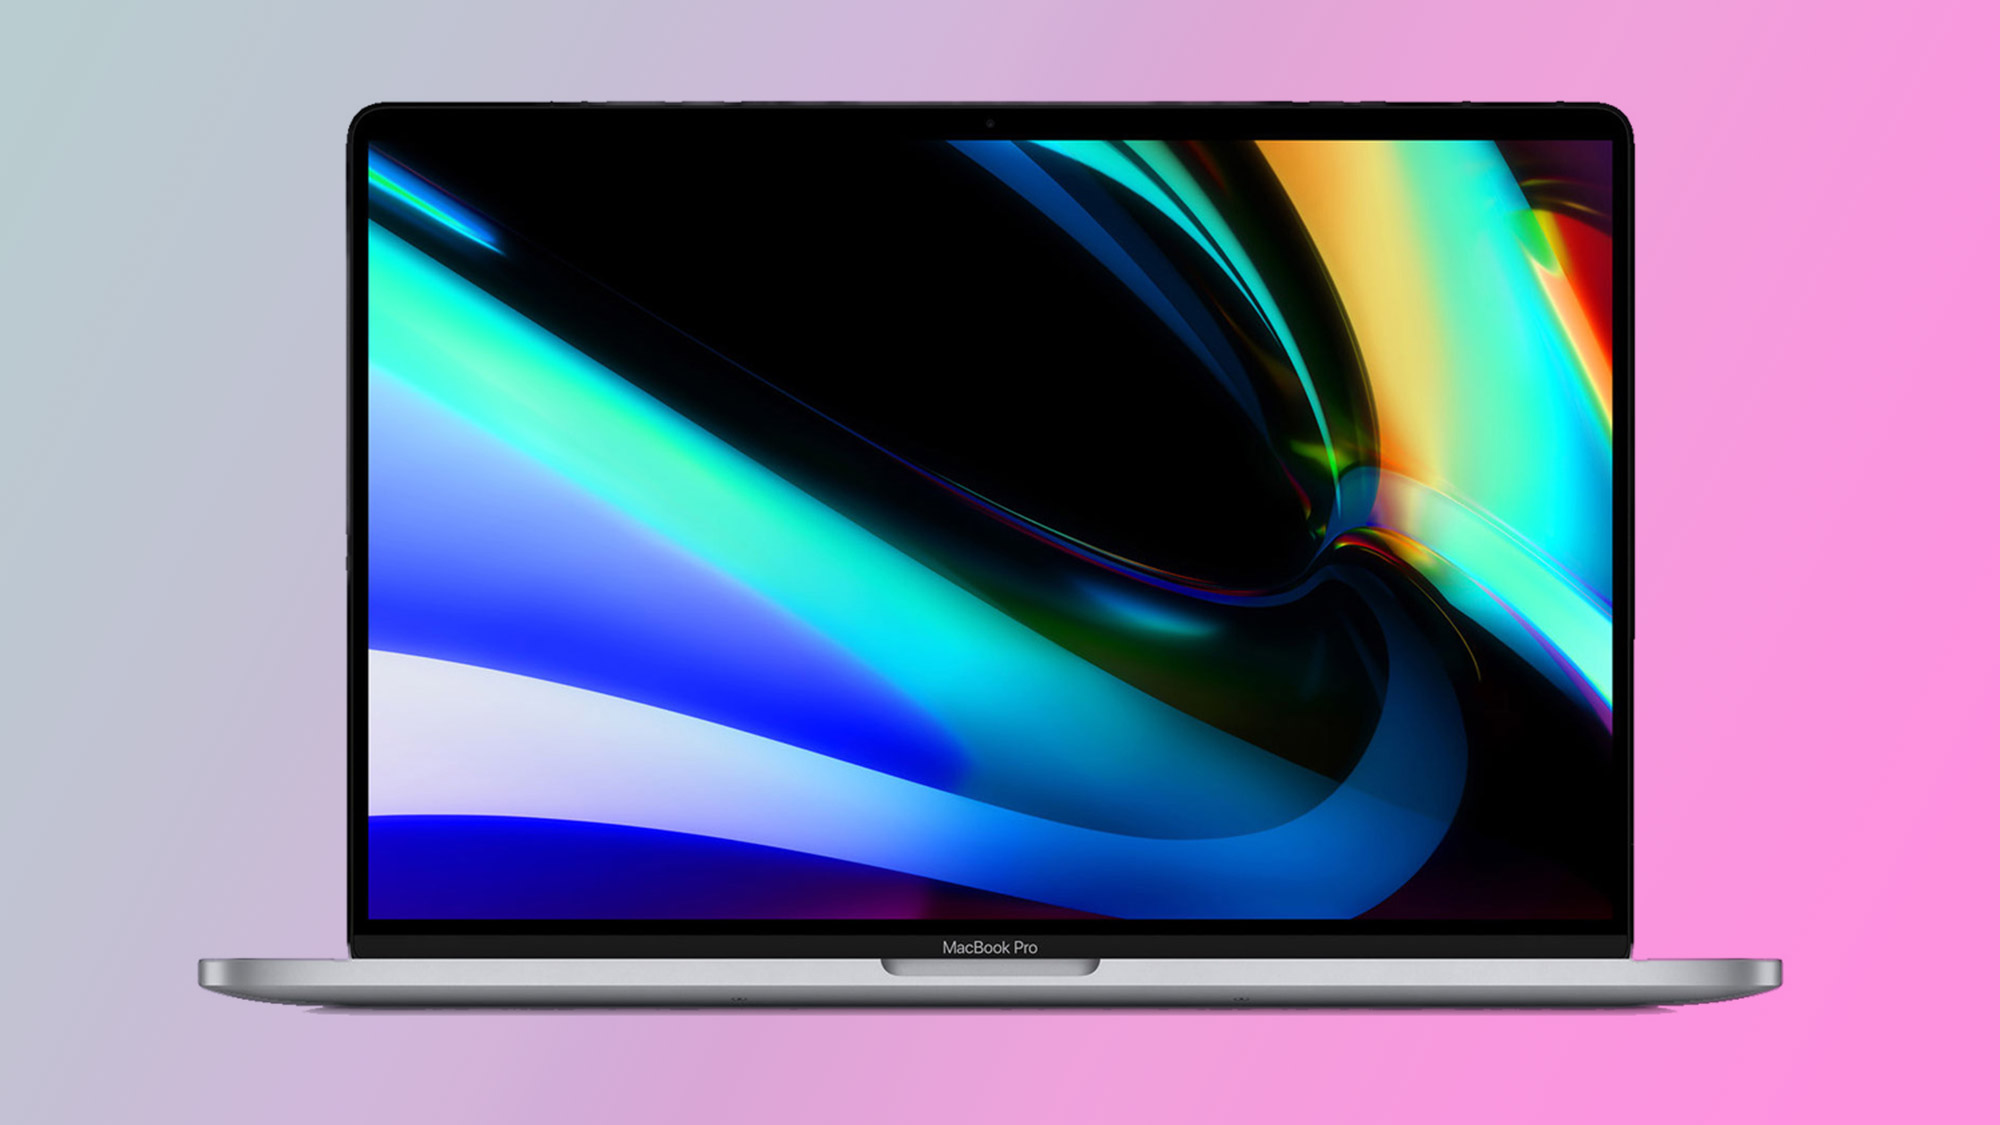 New 14-inch MacBook Pro with LED display the way | Guide